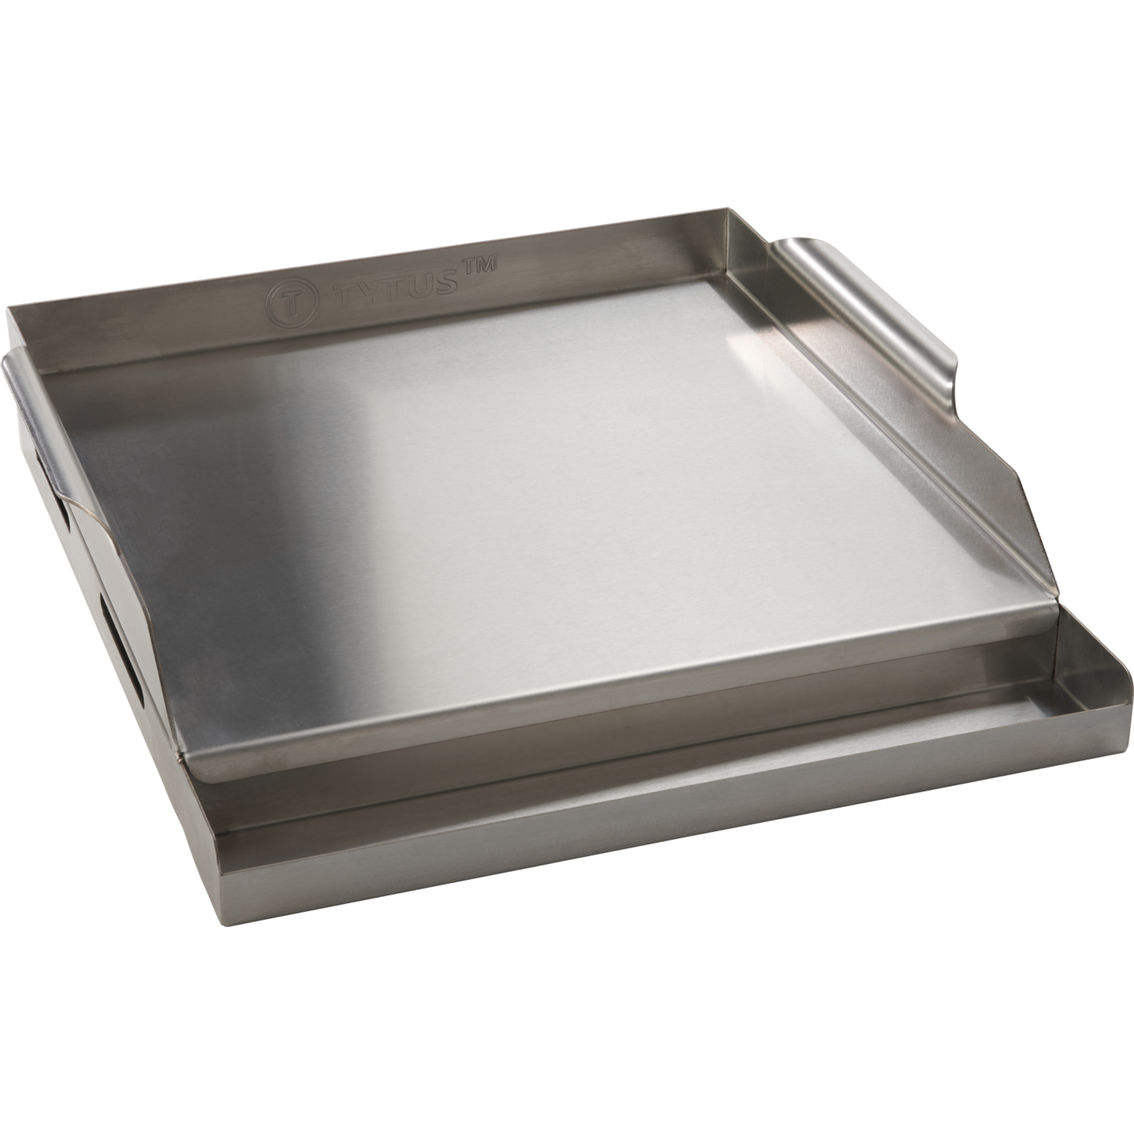 TYTUS Stainless Steel Griddle - Image 2 of 5